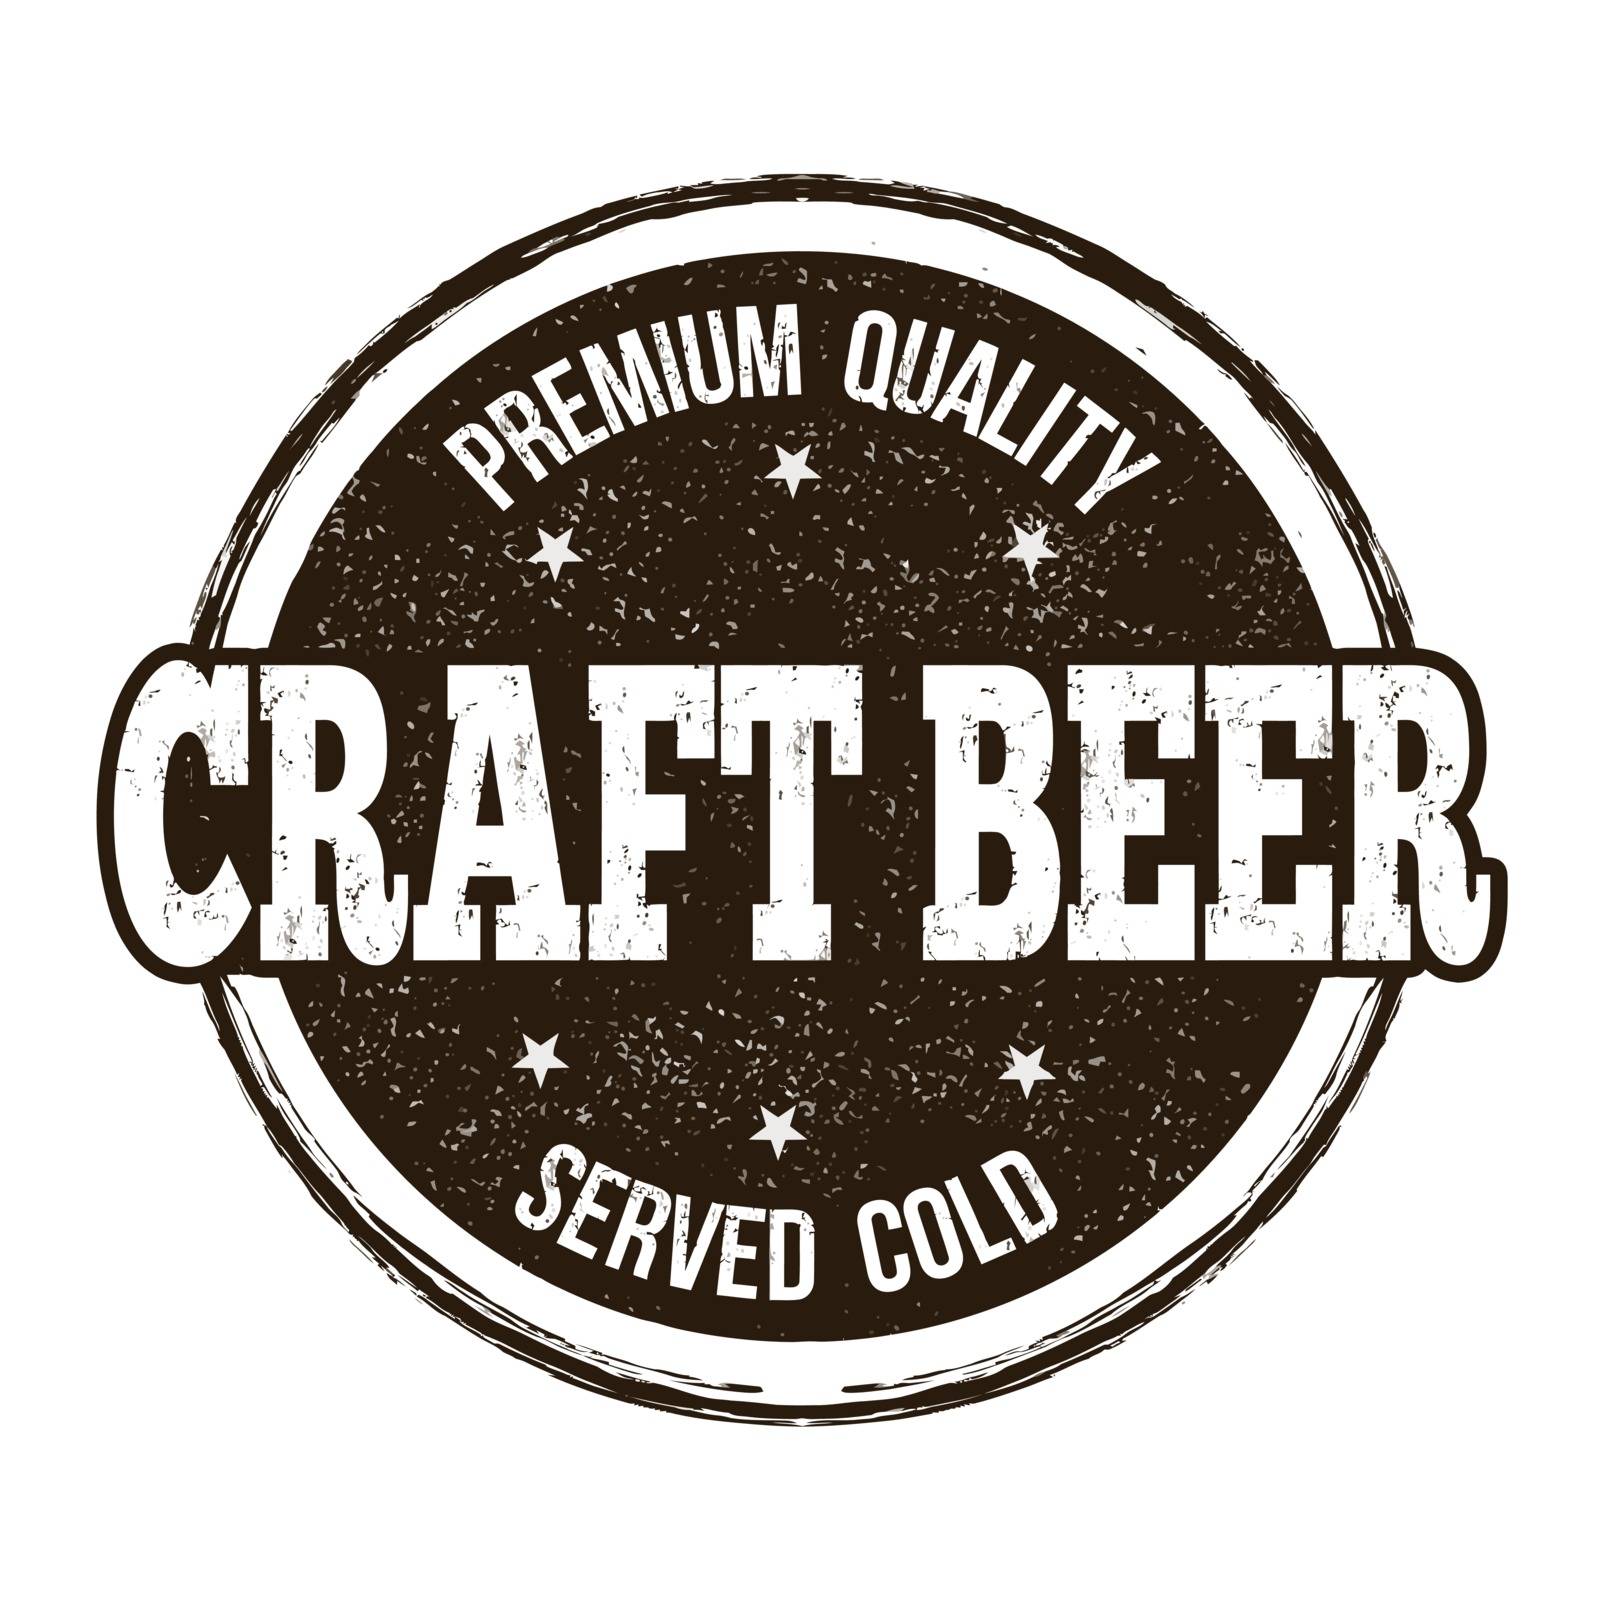 Craft Beer sign or stamp by roxanabalint